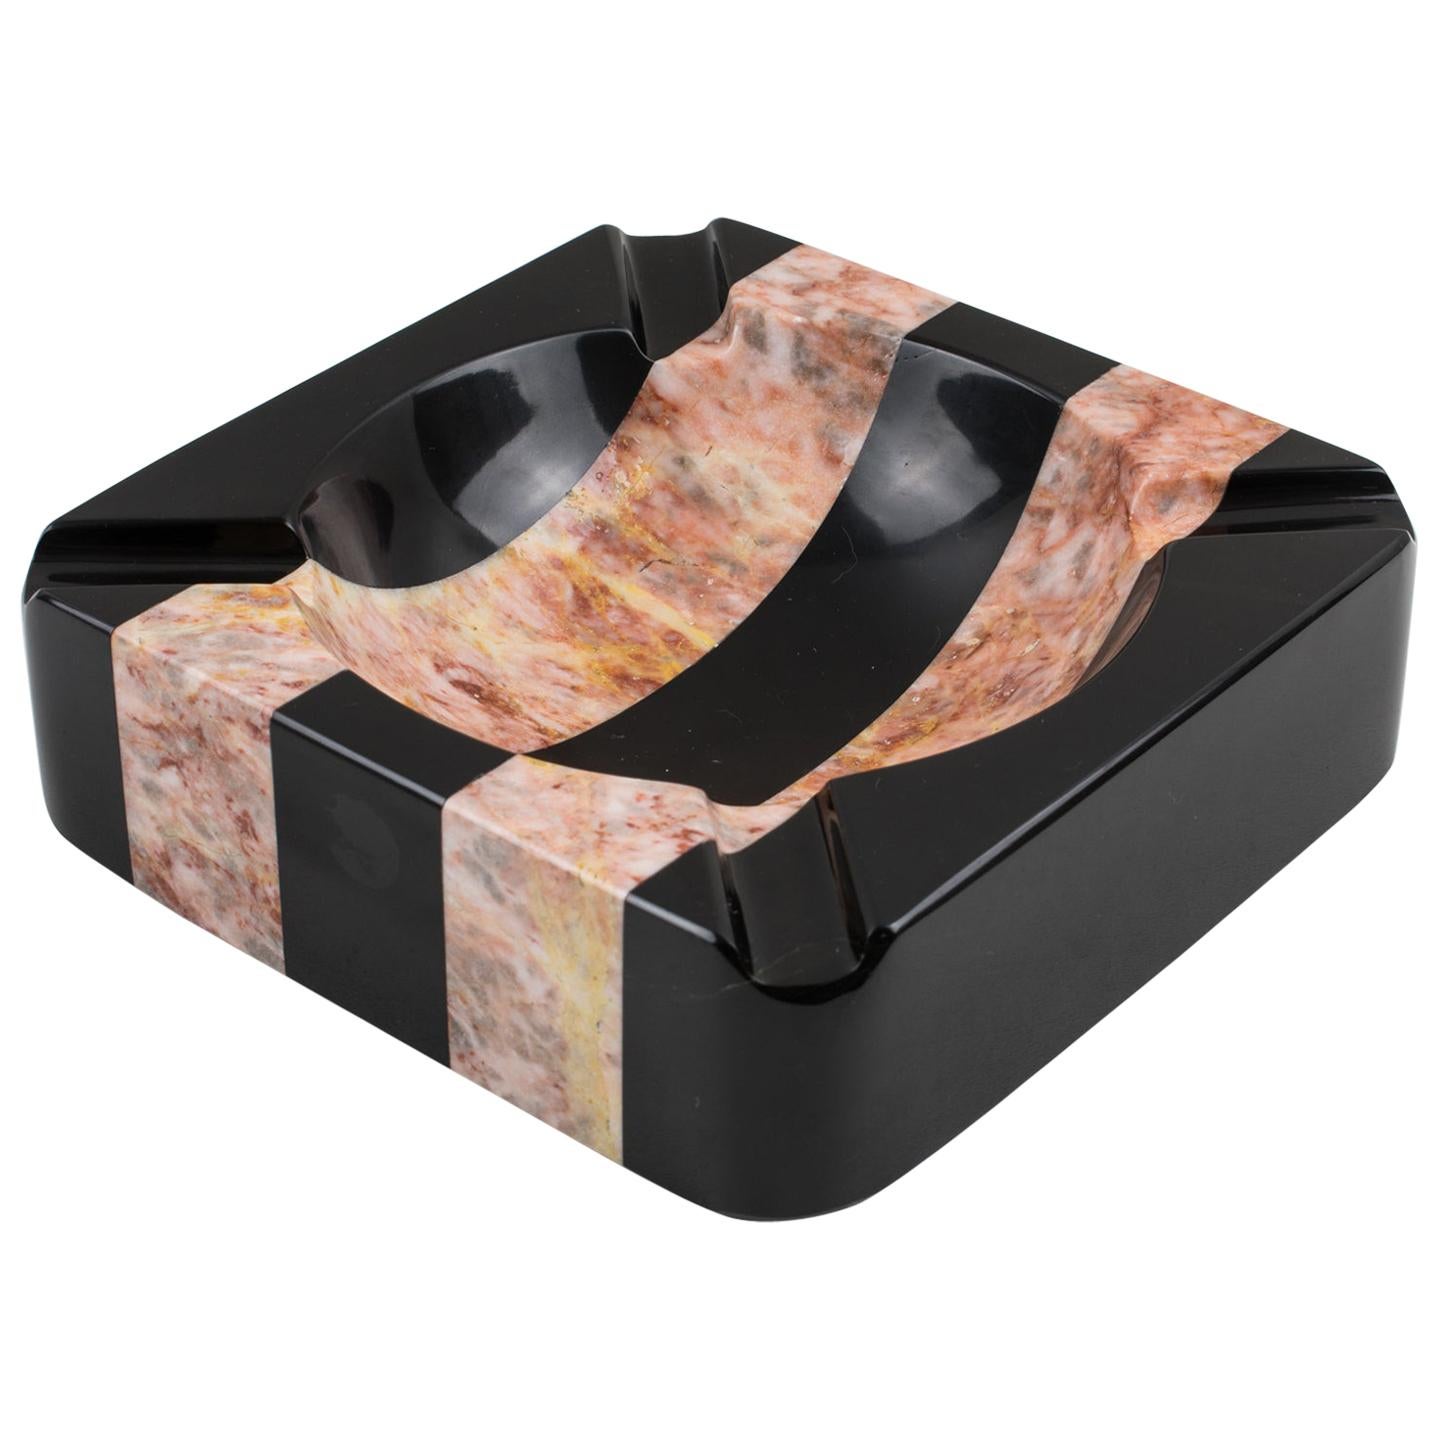 Spectacular large 1970s Italian modernist marble cigar ashtray, desk tidy, vide poche, or catchall. Extra thick marble slab with a striped pattern, and black and pink color stone. No visible maker's mark.
Measurements: 7.88 in. wide (20 cm) x 7.88